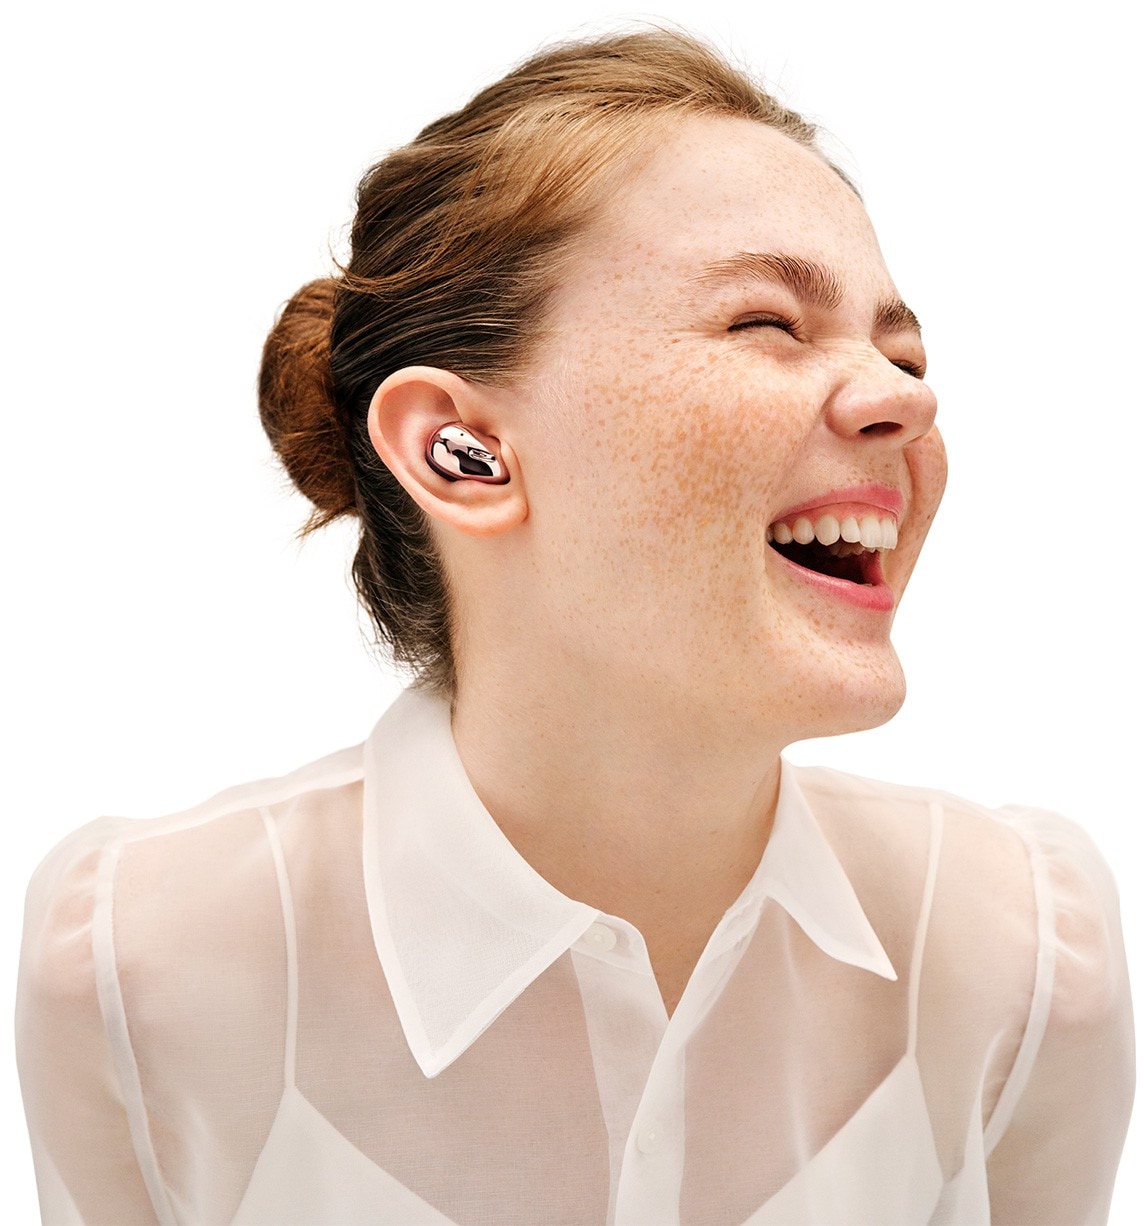 Front view of Galaxy Buds Live in Mystic Bronze. Right Galaxy Buds Live earbud disappears as the left earbud shrinks and fits in the ear of a woman laughing.